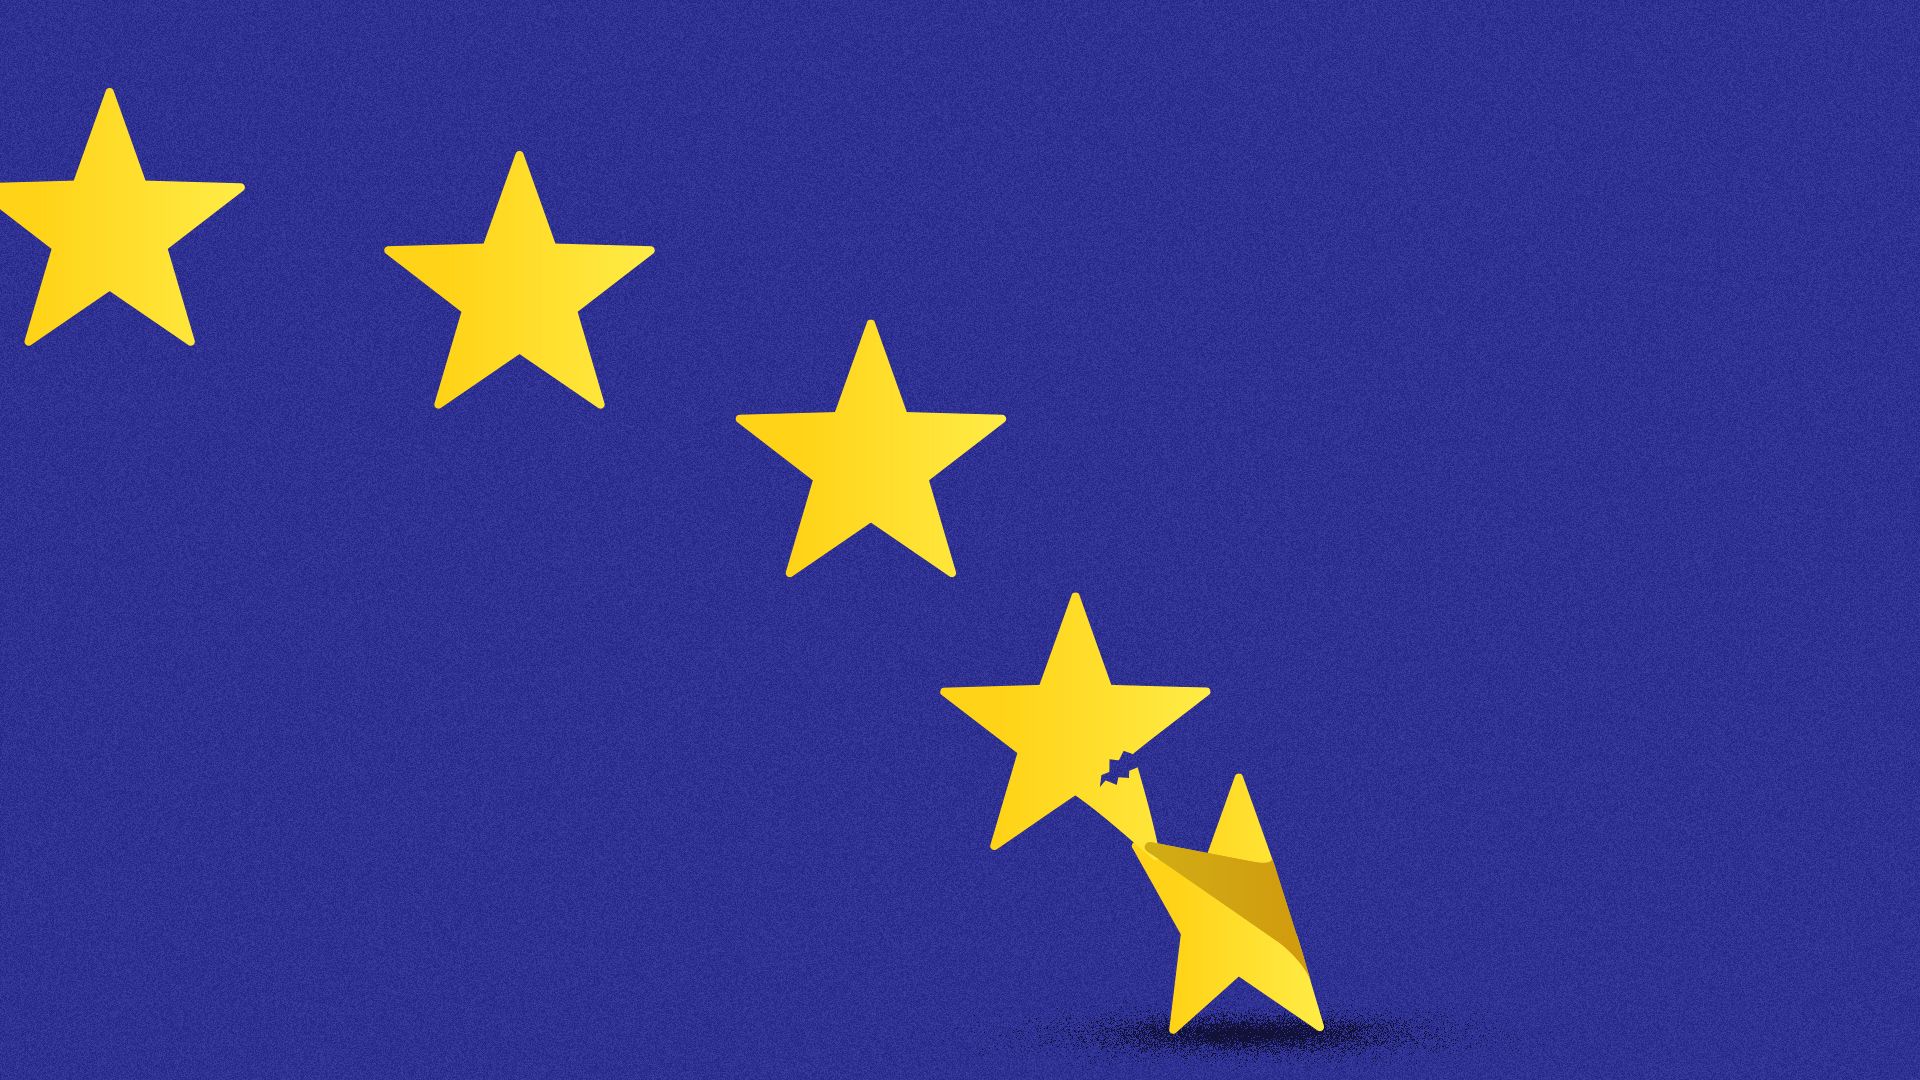 Illustration of the EU flag stars with one star pulling the leg off of another star. 